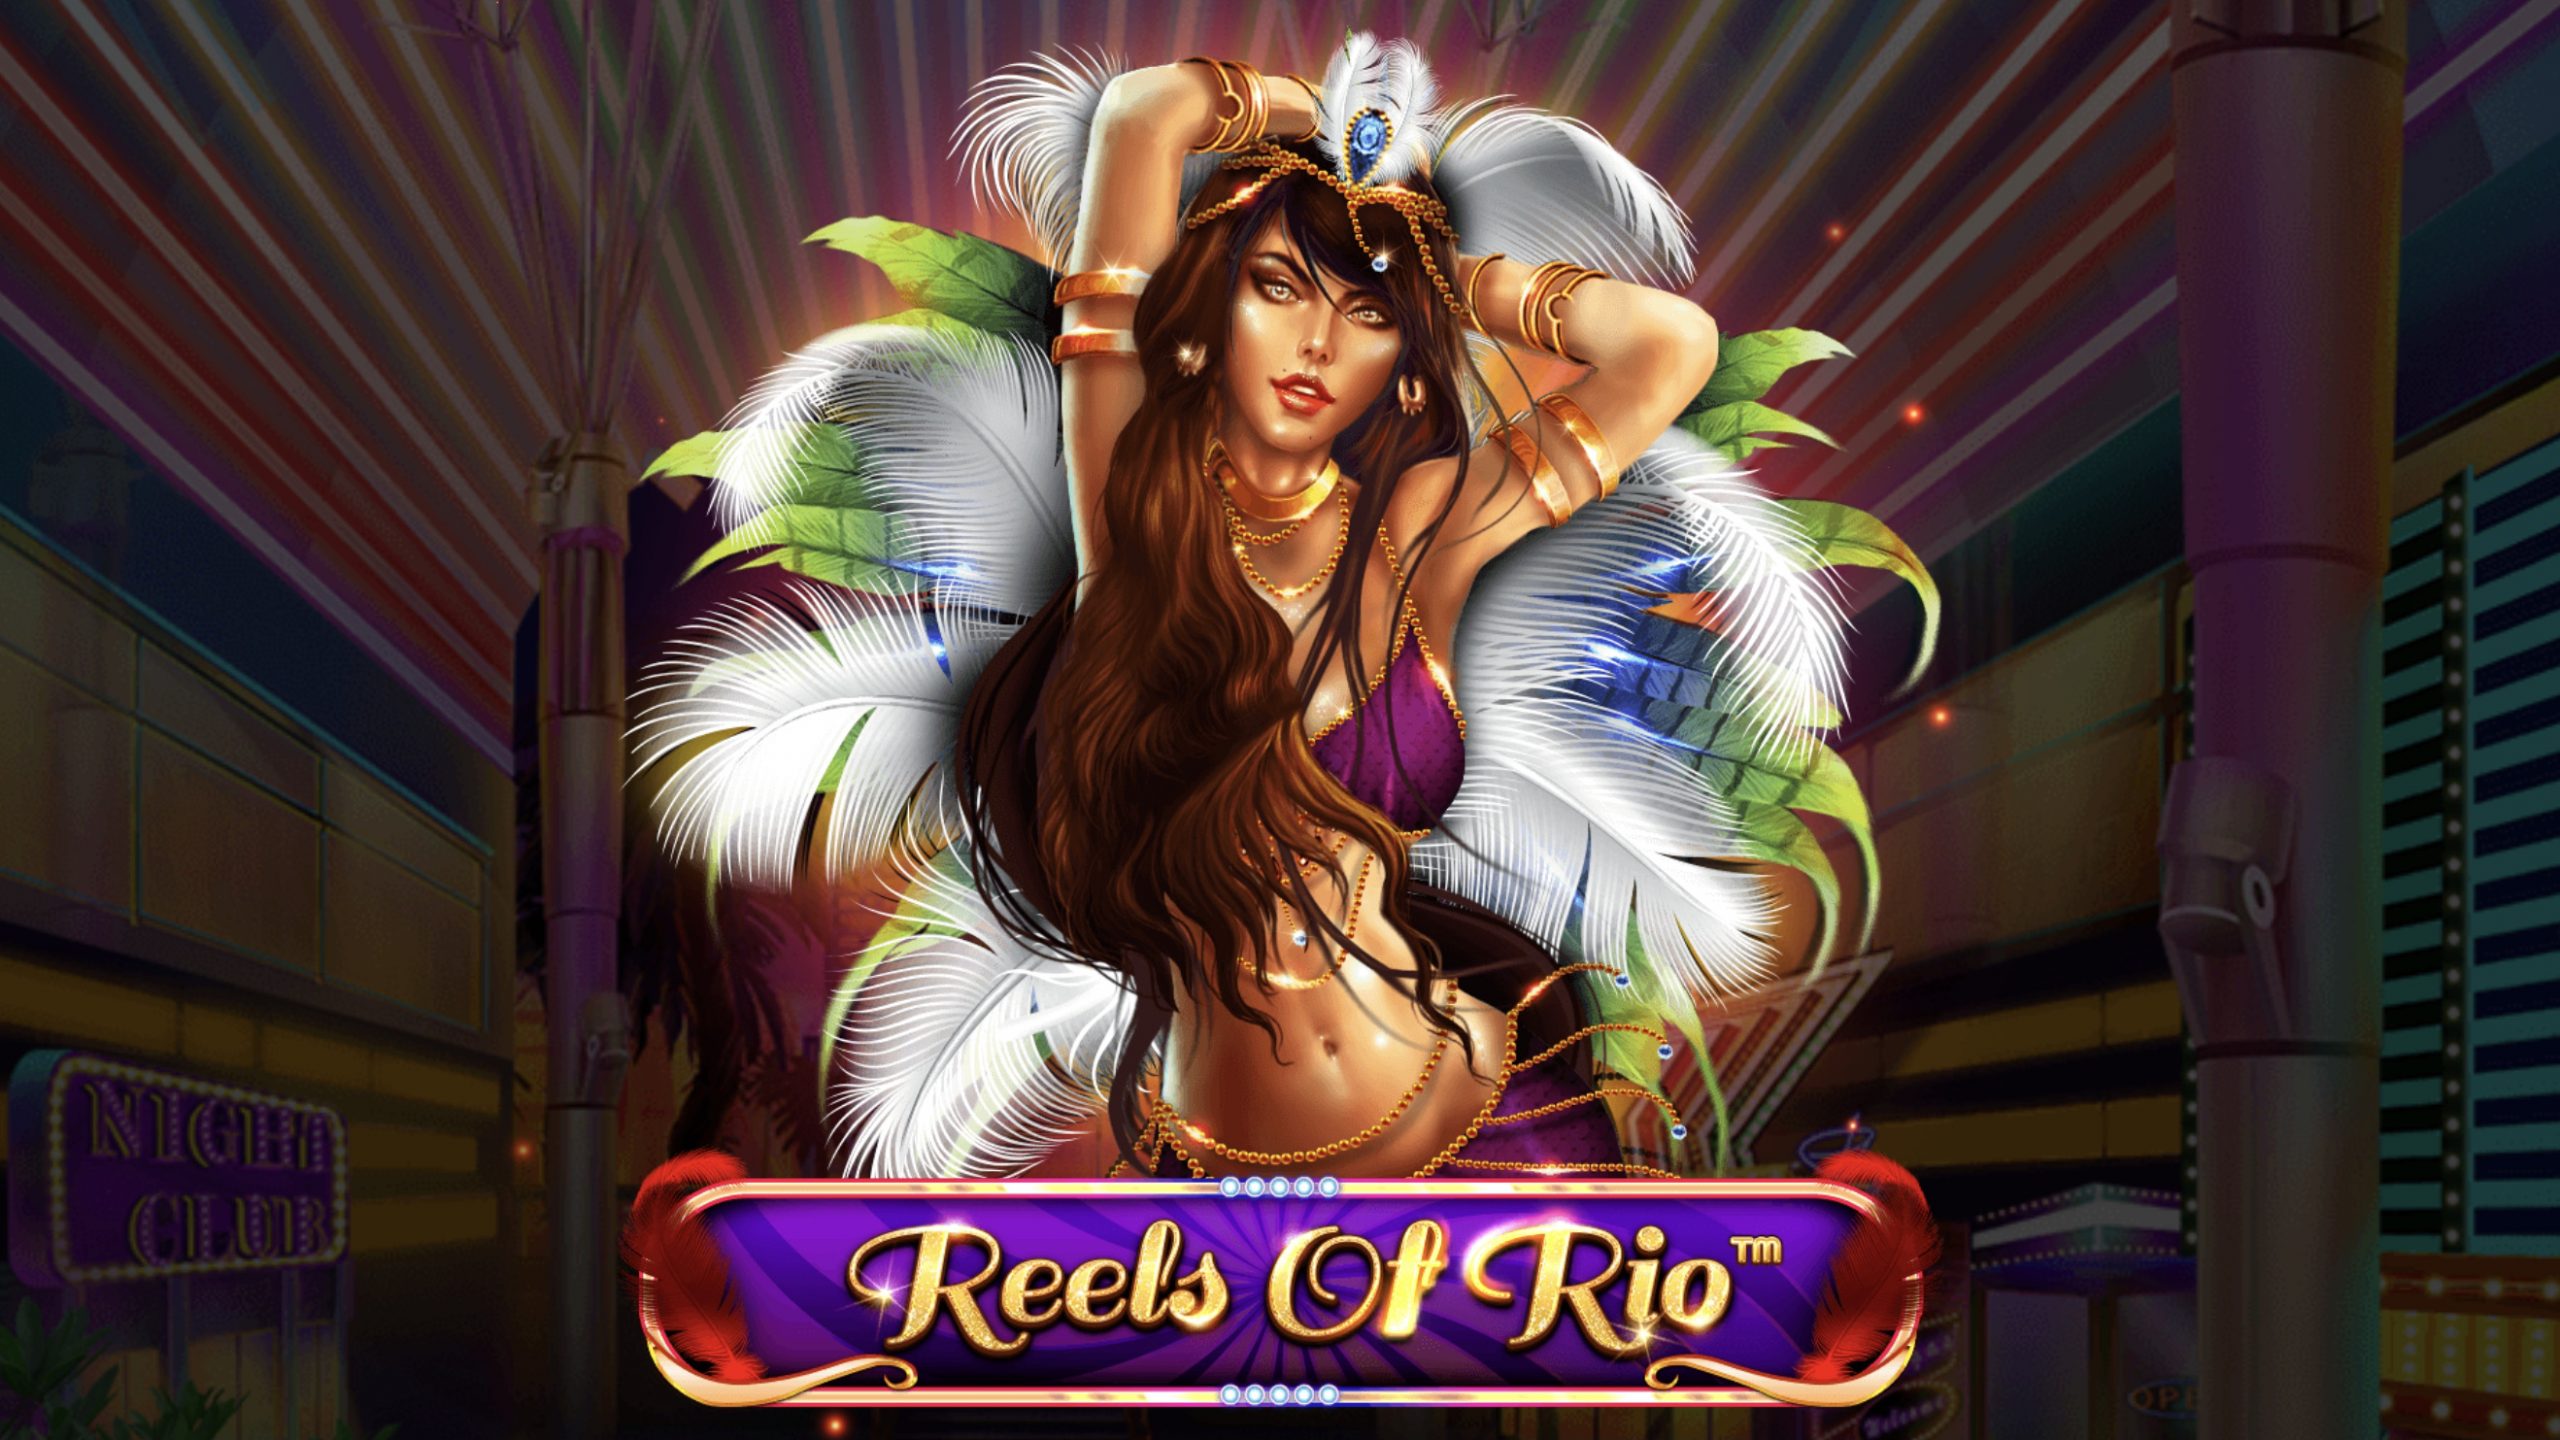 Reels of Rio is a 5x3, 30-payline video slot that incorporates a maximum win potential of up to x1,000 the bet.